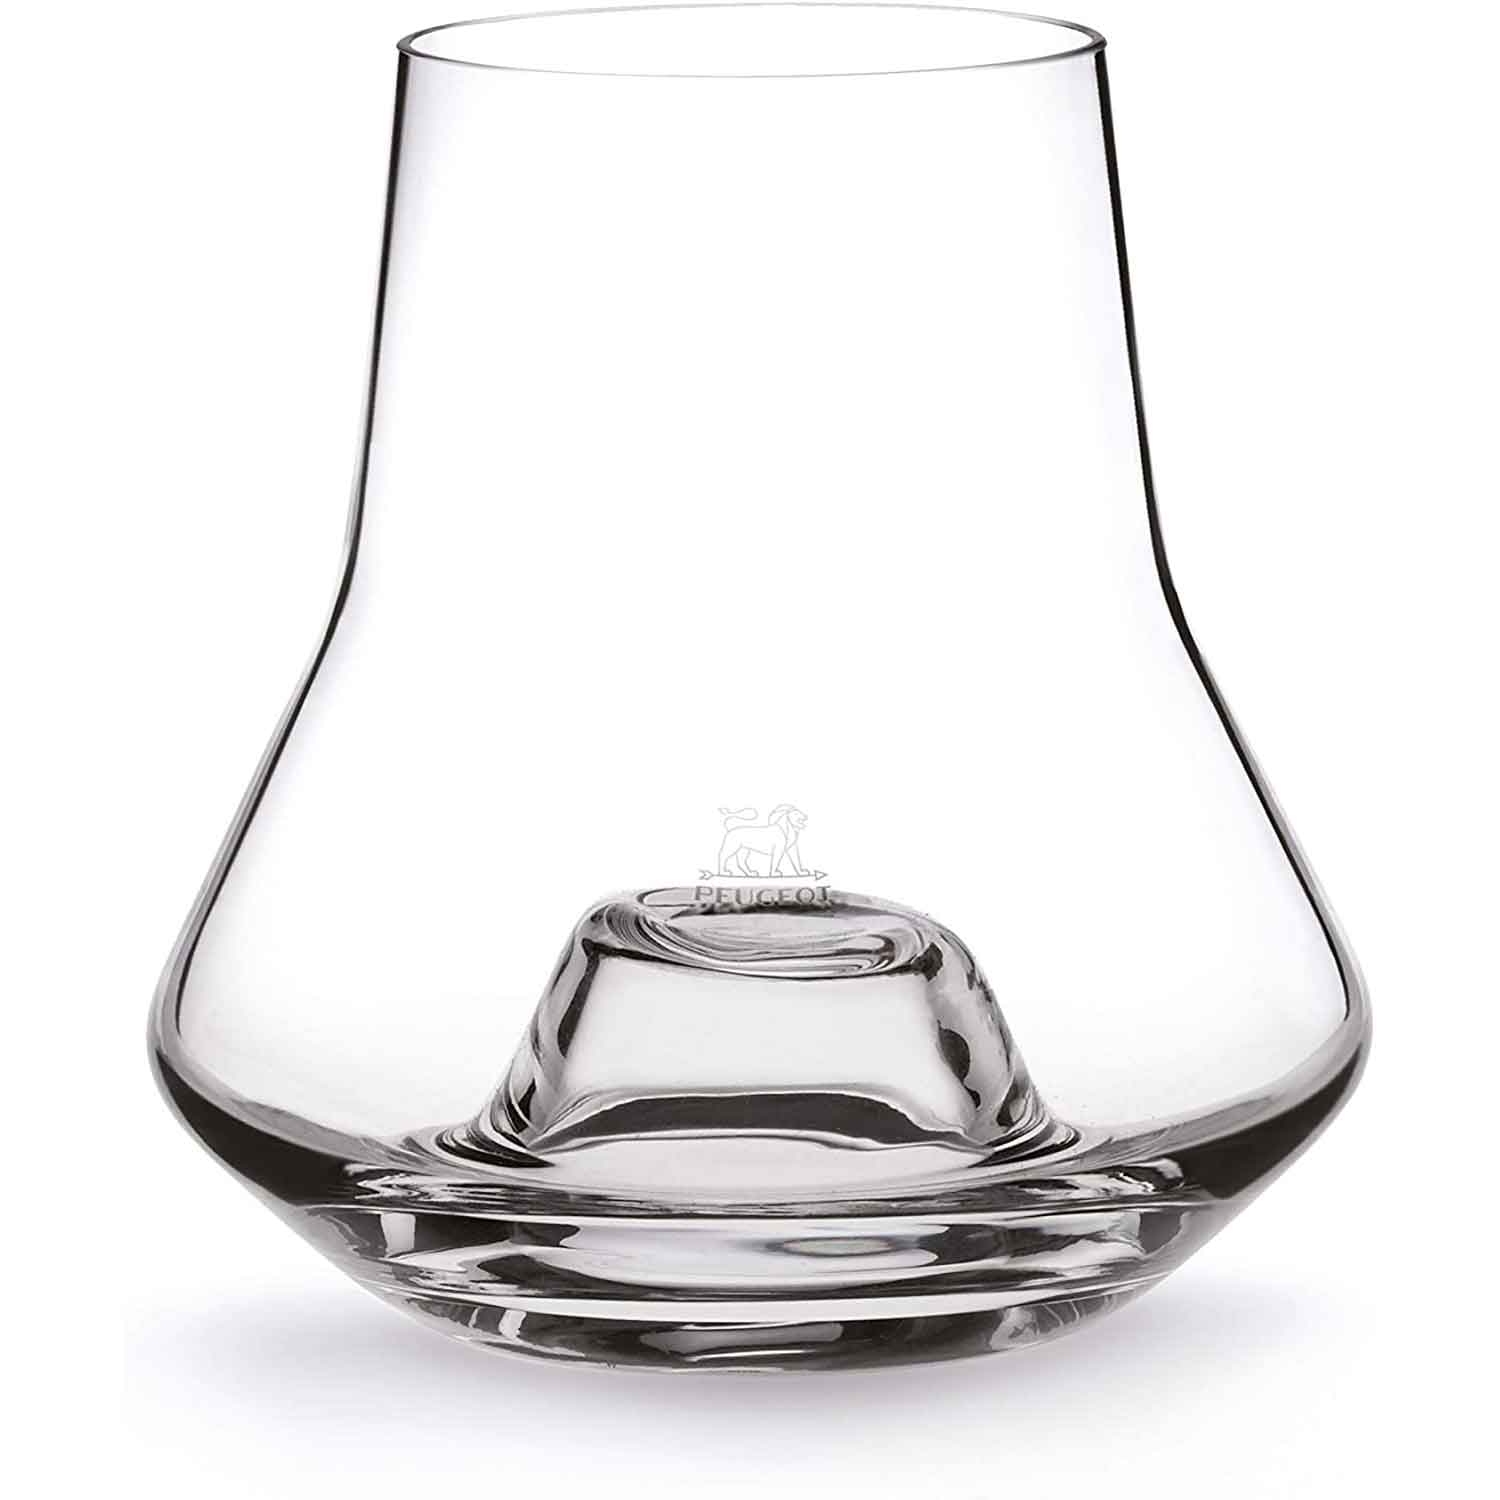 Whisky glass 9.8oz / 29cl - Singly sold - Les Impitoyables - Peugeot